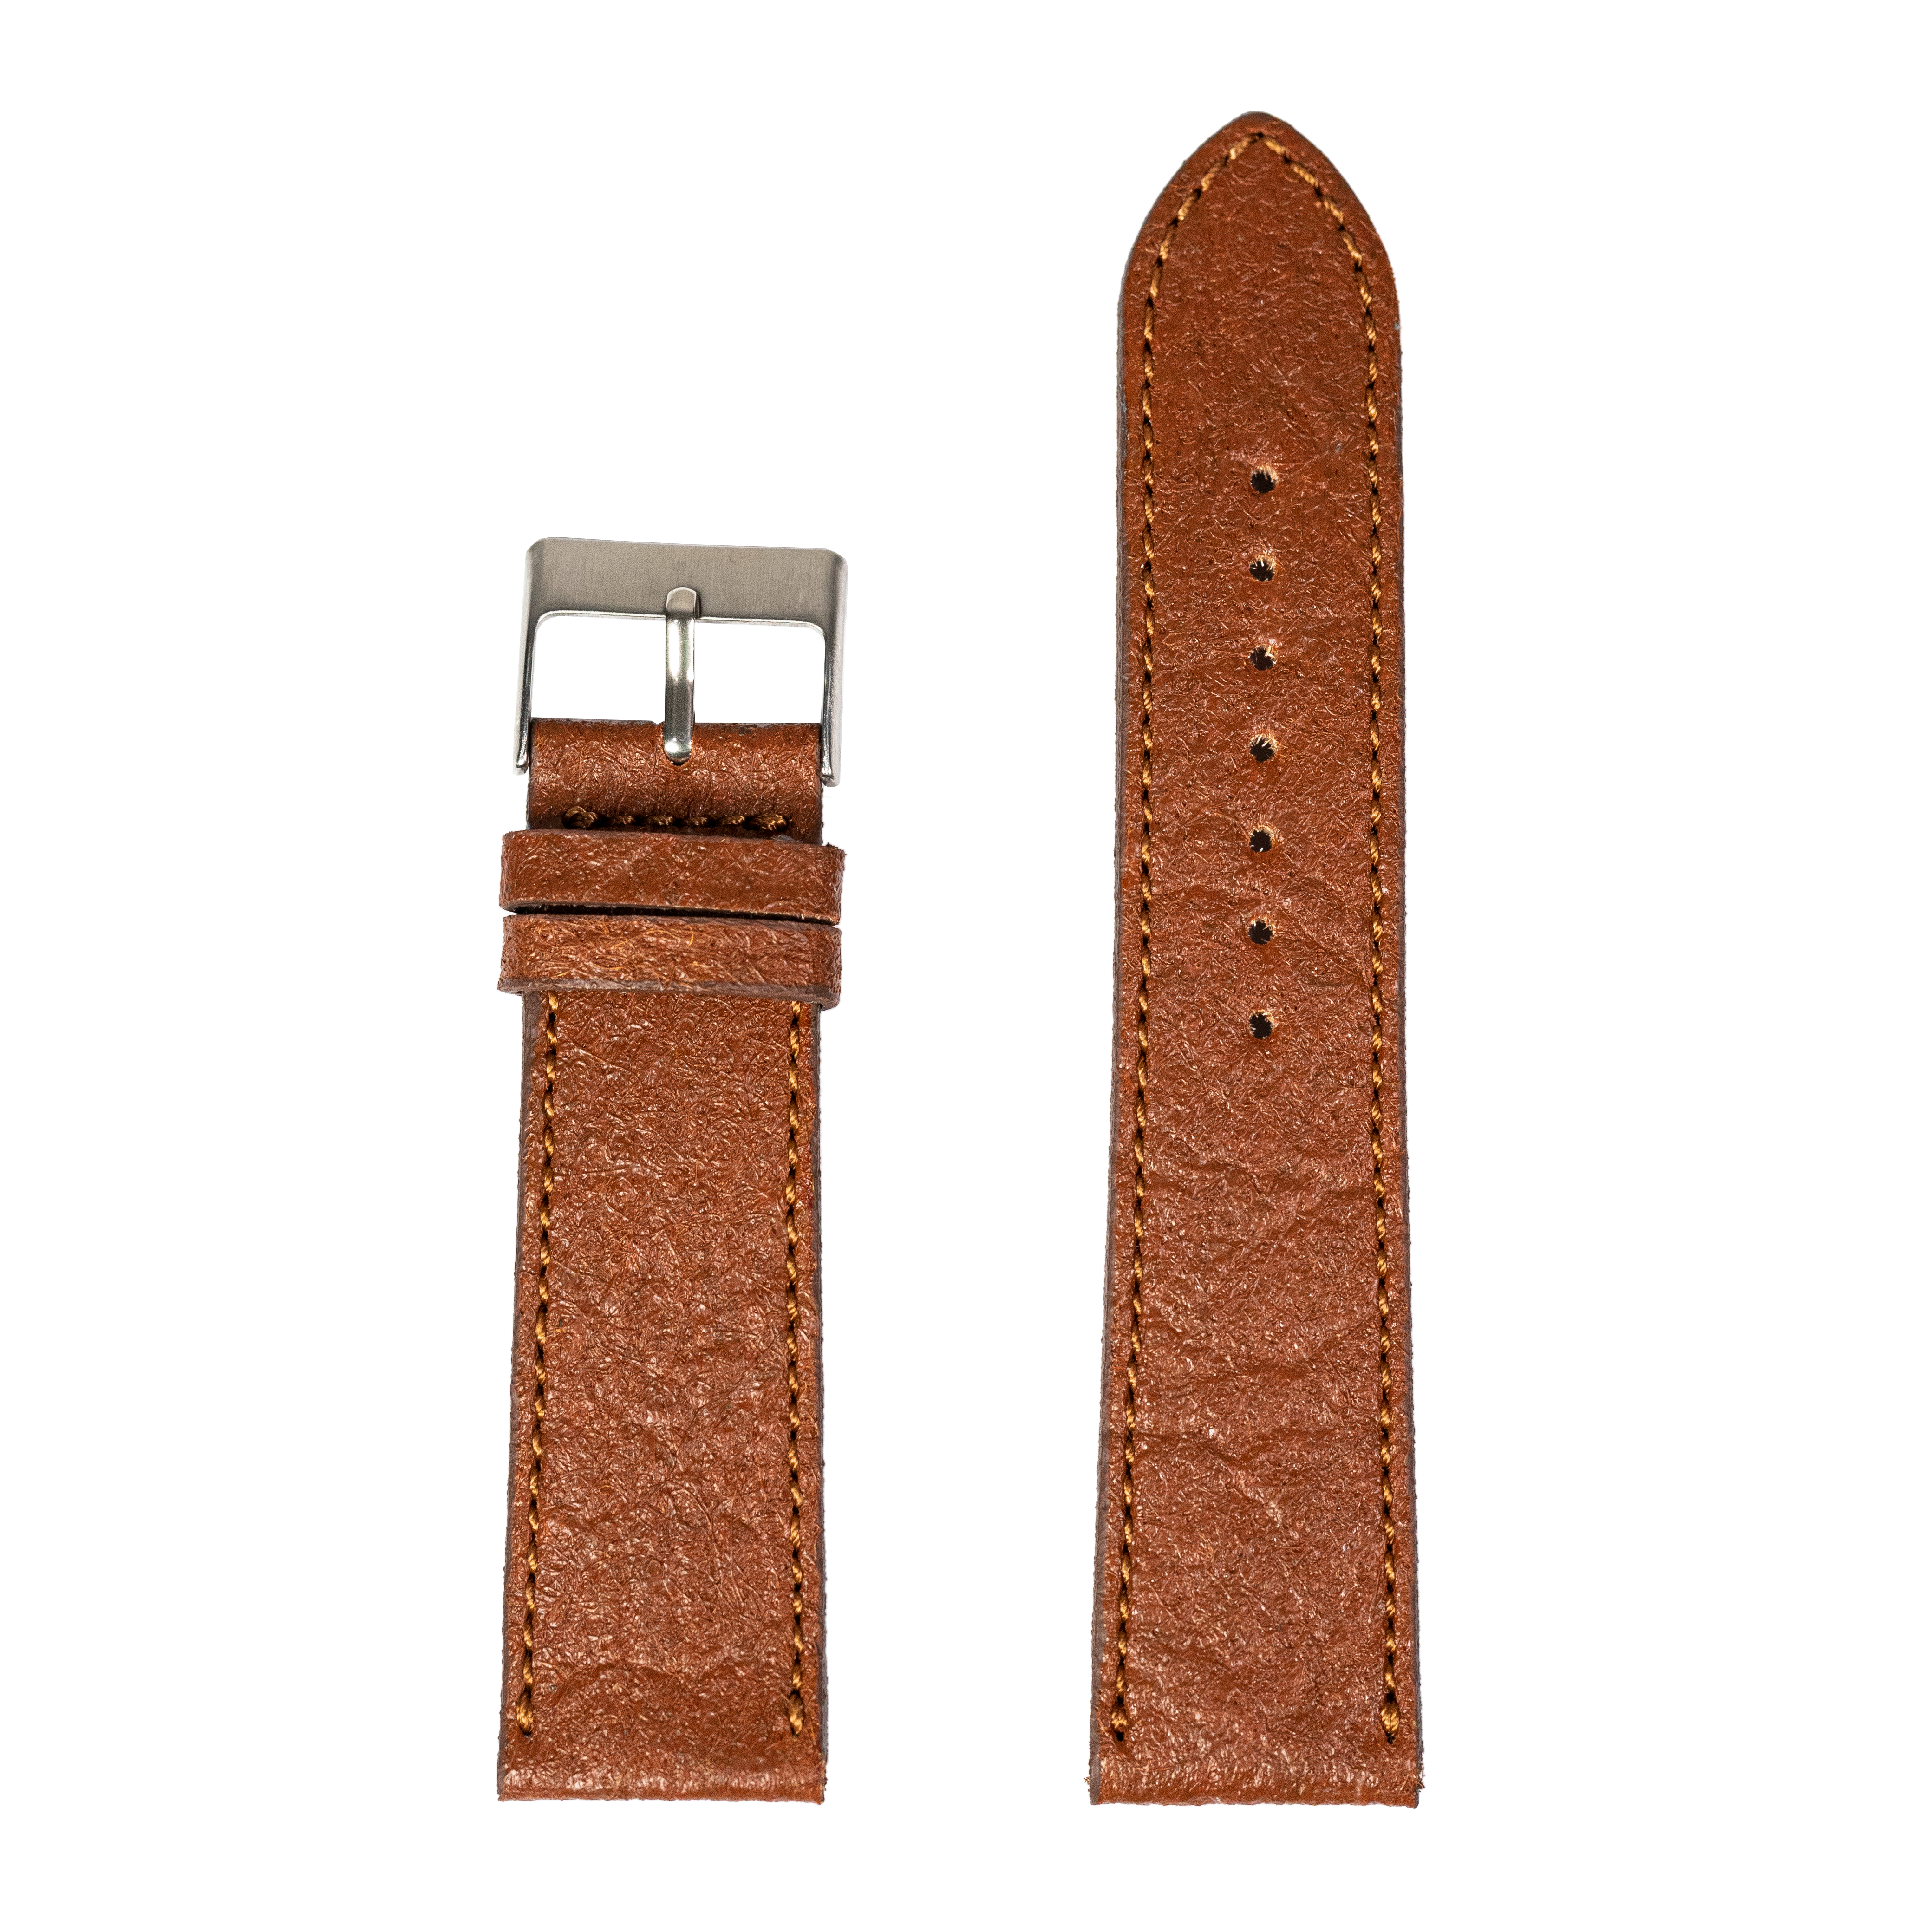 [QuickFit] Pineapple Vegan Leather - Brown 22mm